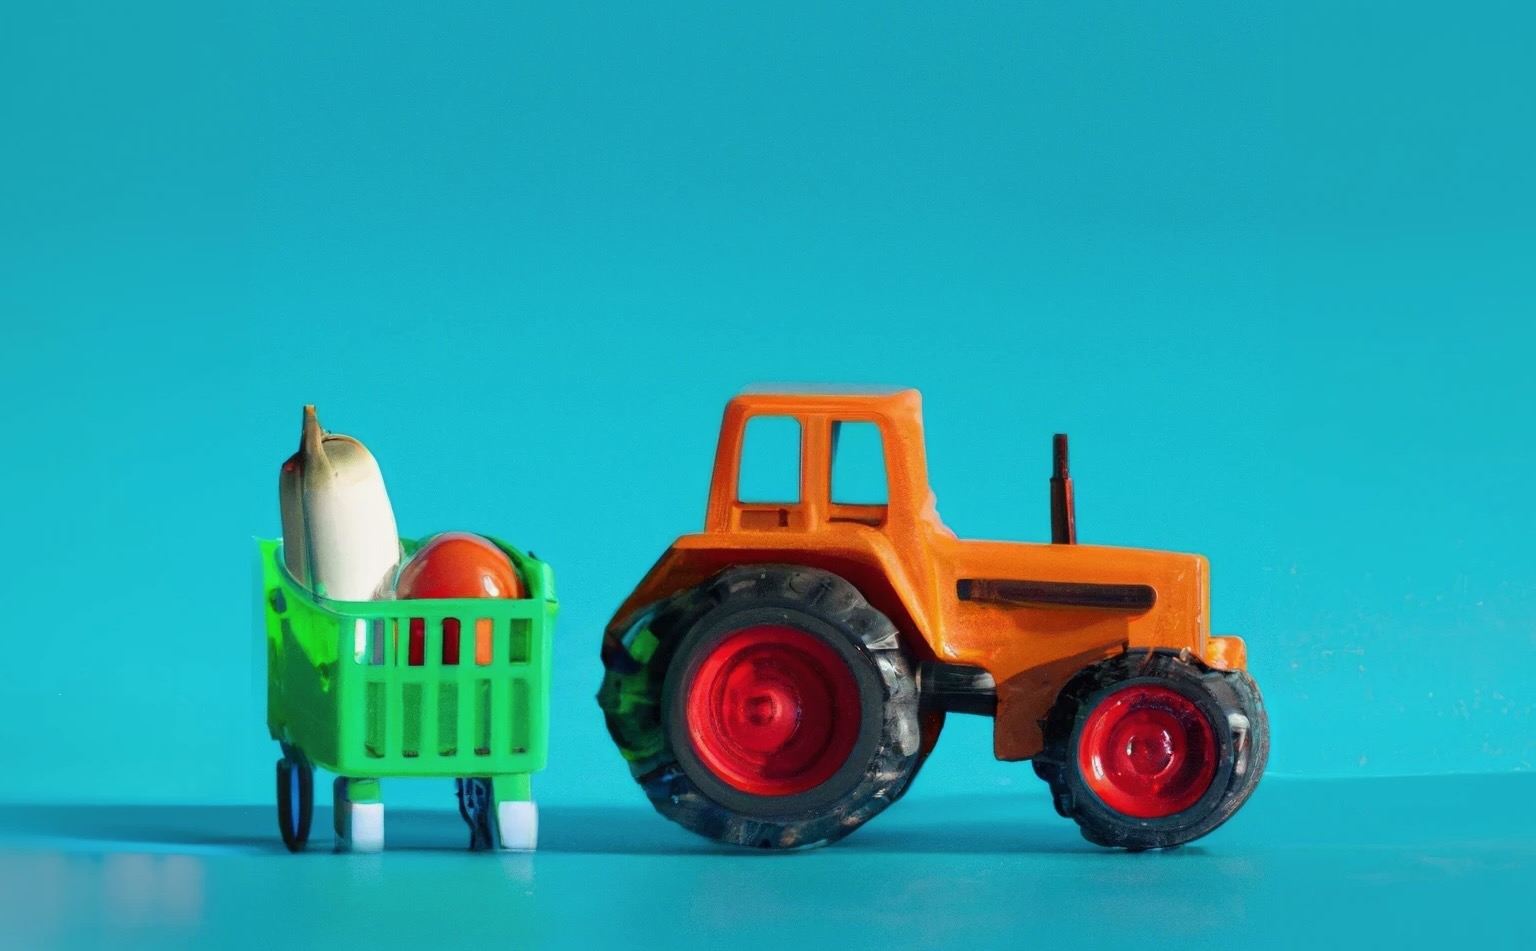 A plastic toy grocery cart full of vegetables sits next to a plastic toy tractor against a teal background.